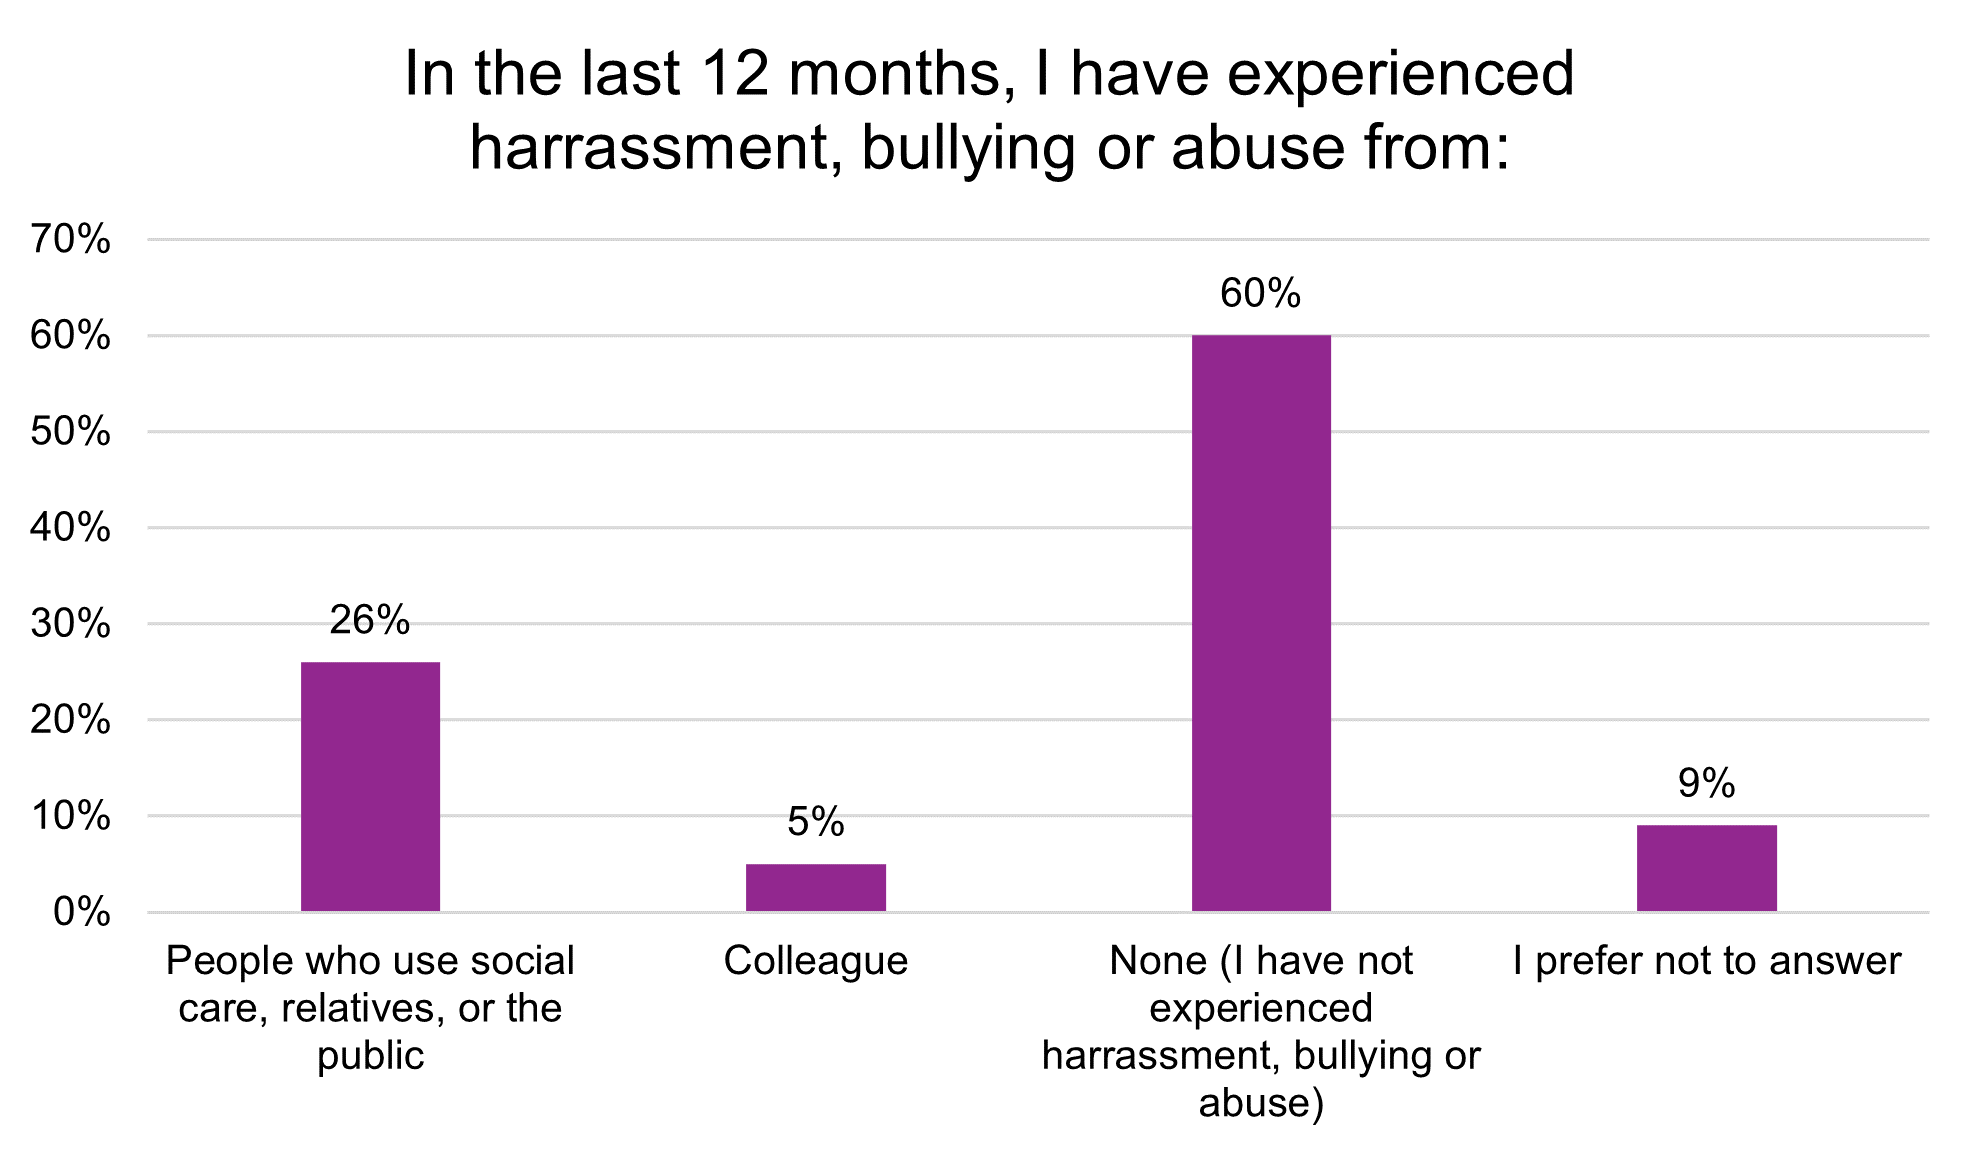 Employer standards survey for registered social workers: bullying, harassment, and abuse